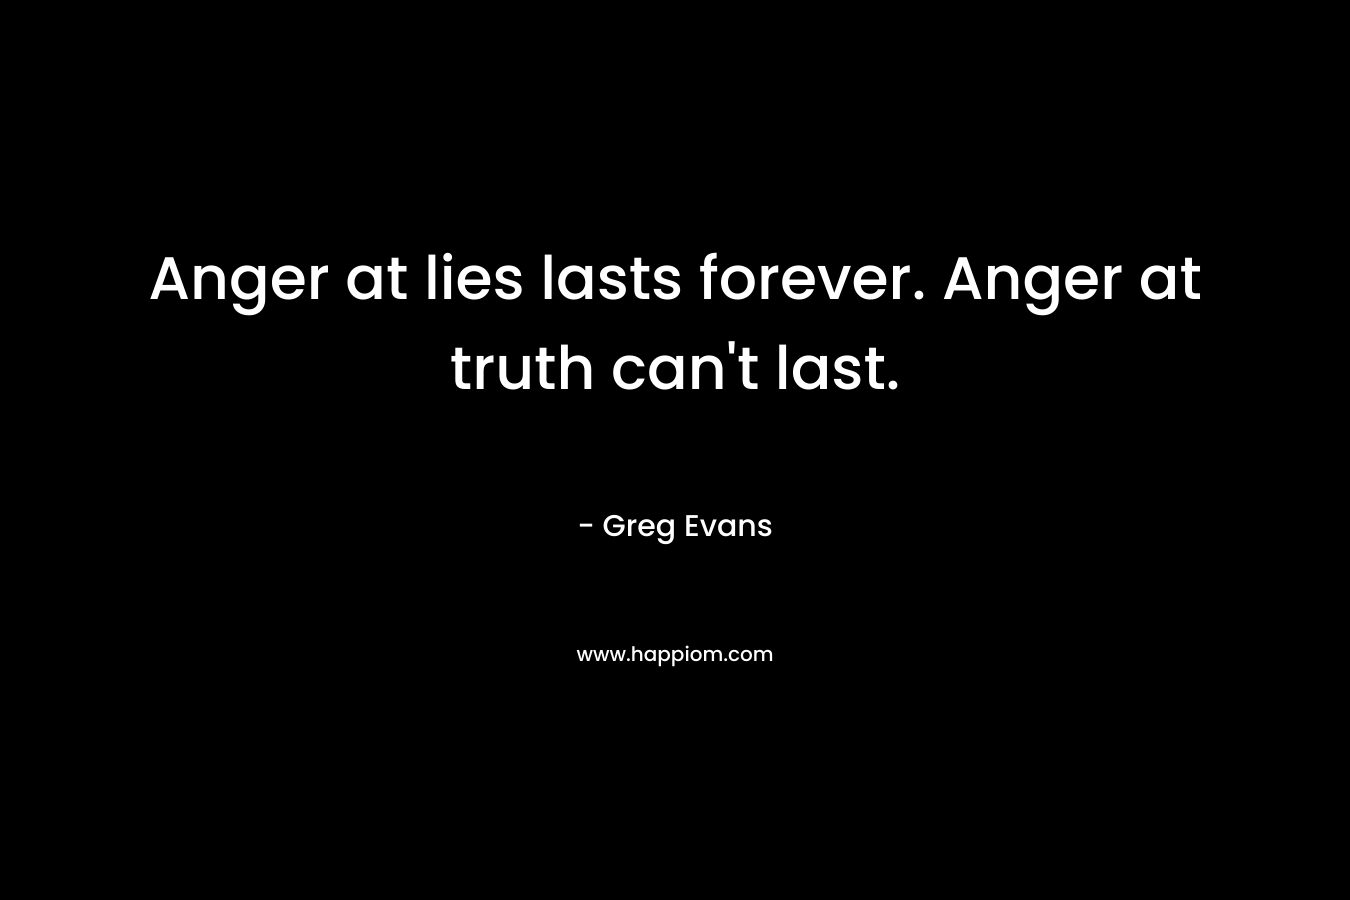 Anger at lies lasts forever. Anger at truth can't last.